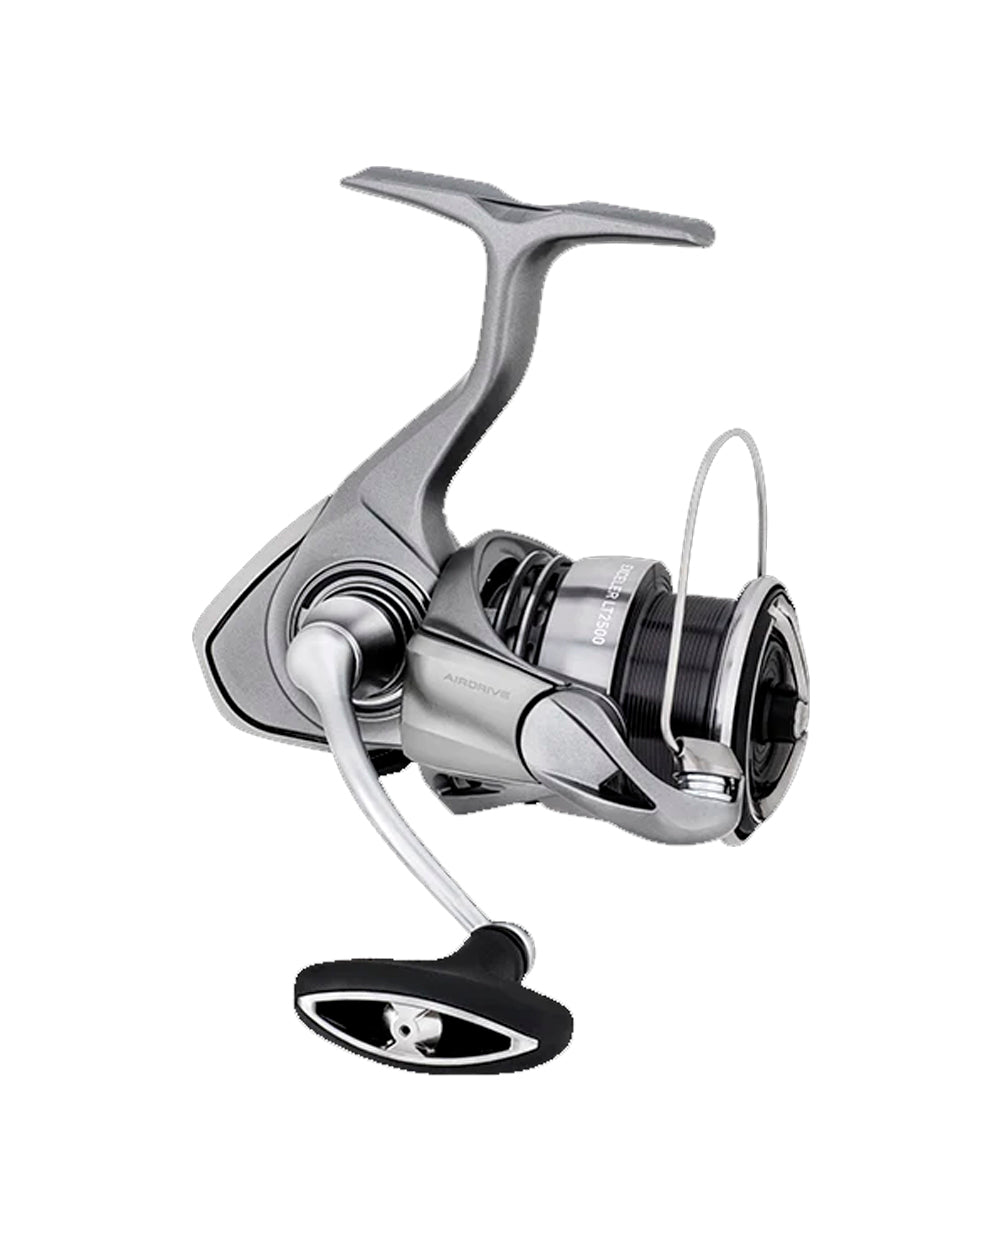 Shopping online for the newest Daiwa 23 Exceler Spin Reels Daiwa